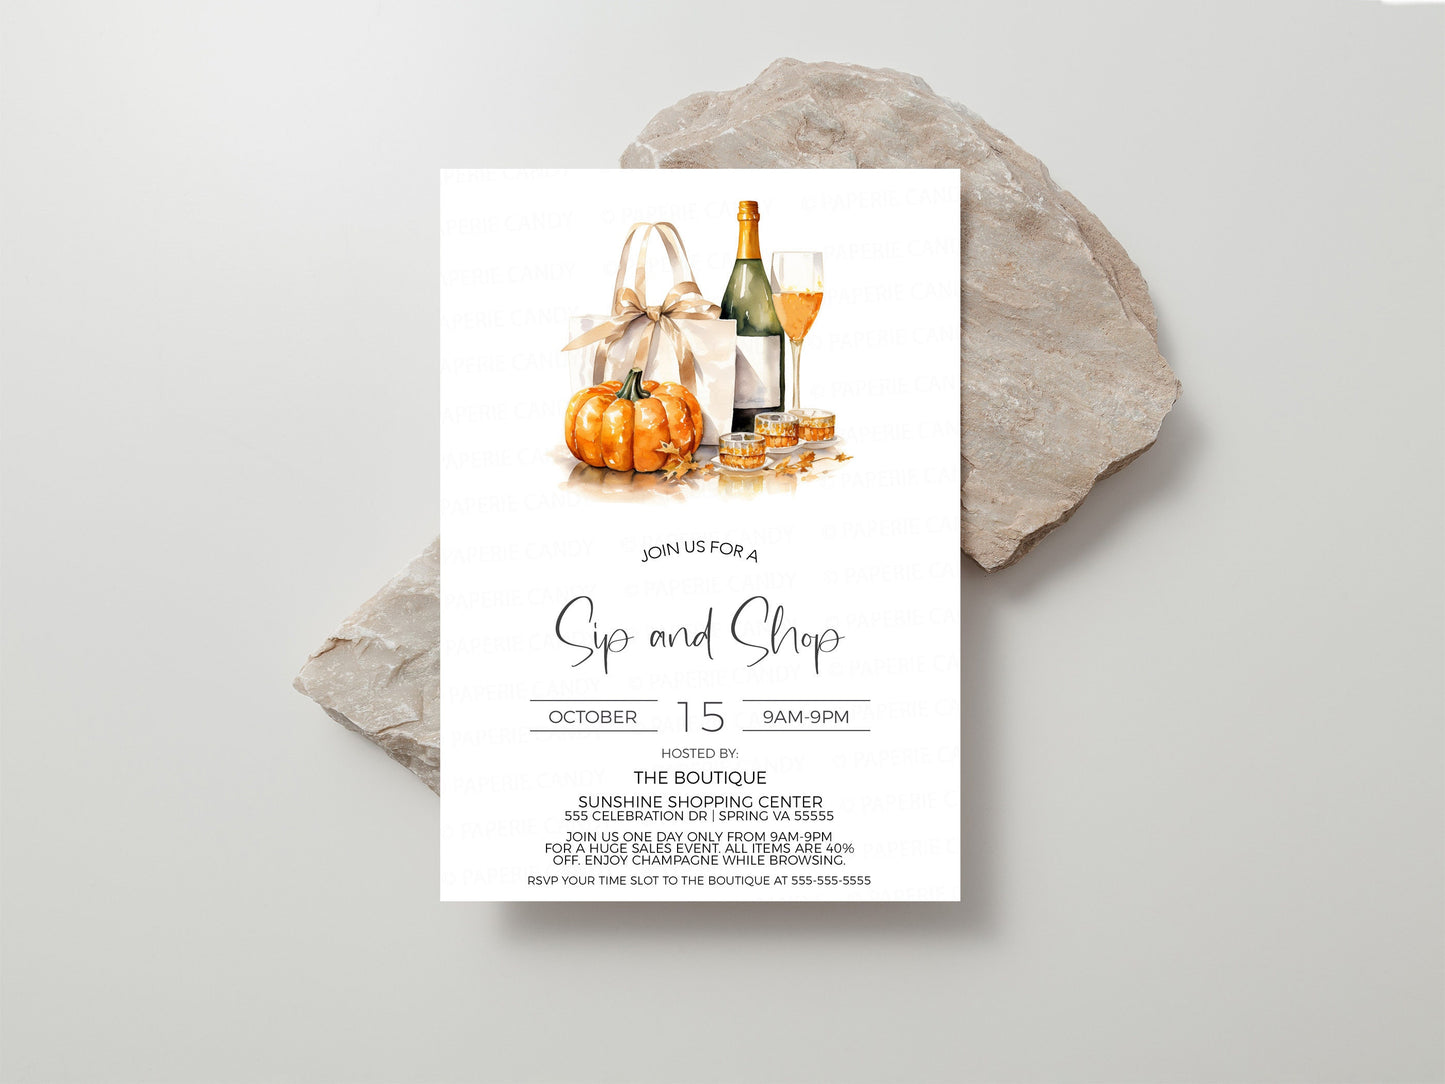 Fall Sip And Shop Invitation, Autumn Sip and Shop Invite, Thanksgiving Boutique Store Holiday Sale Event, Champagne Wine Shopping, Editable